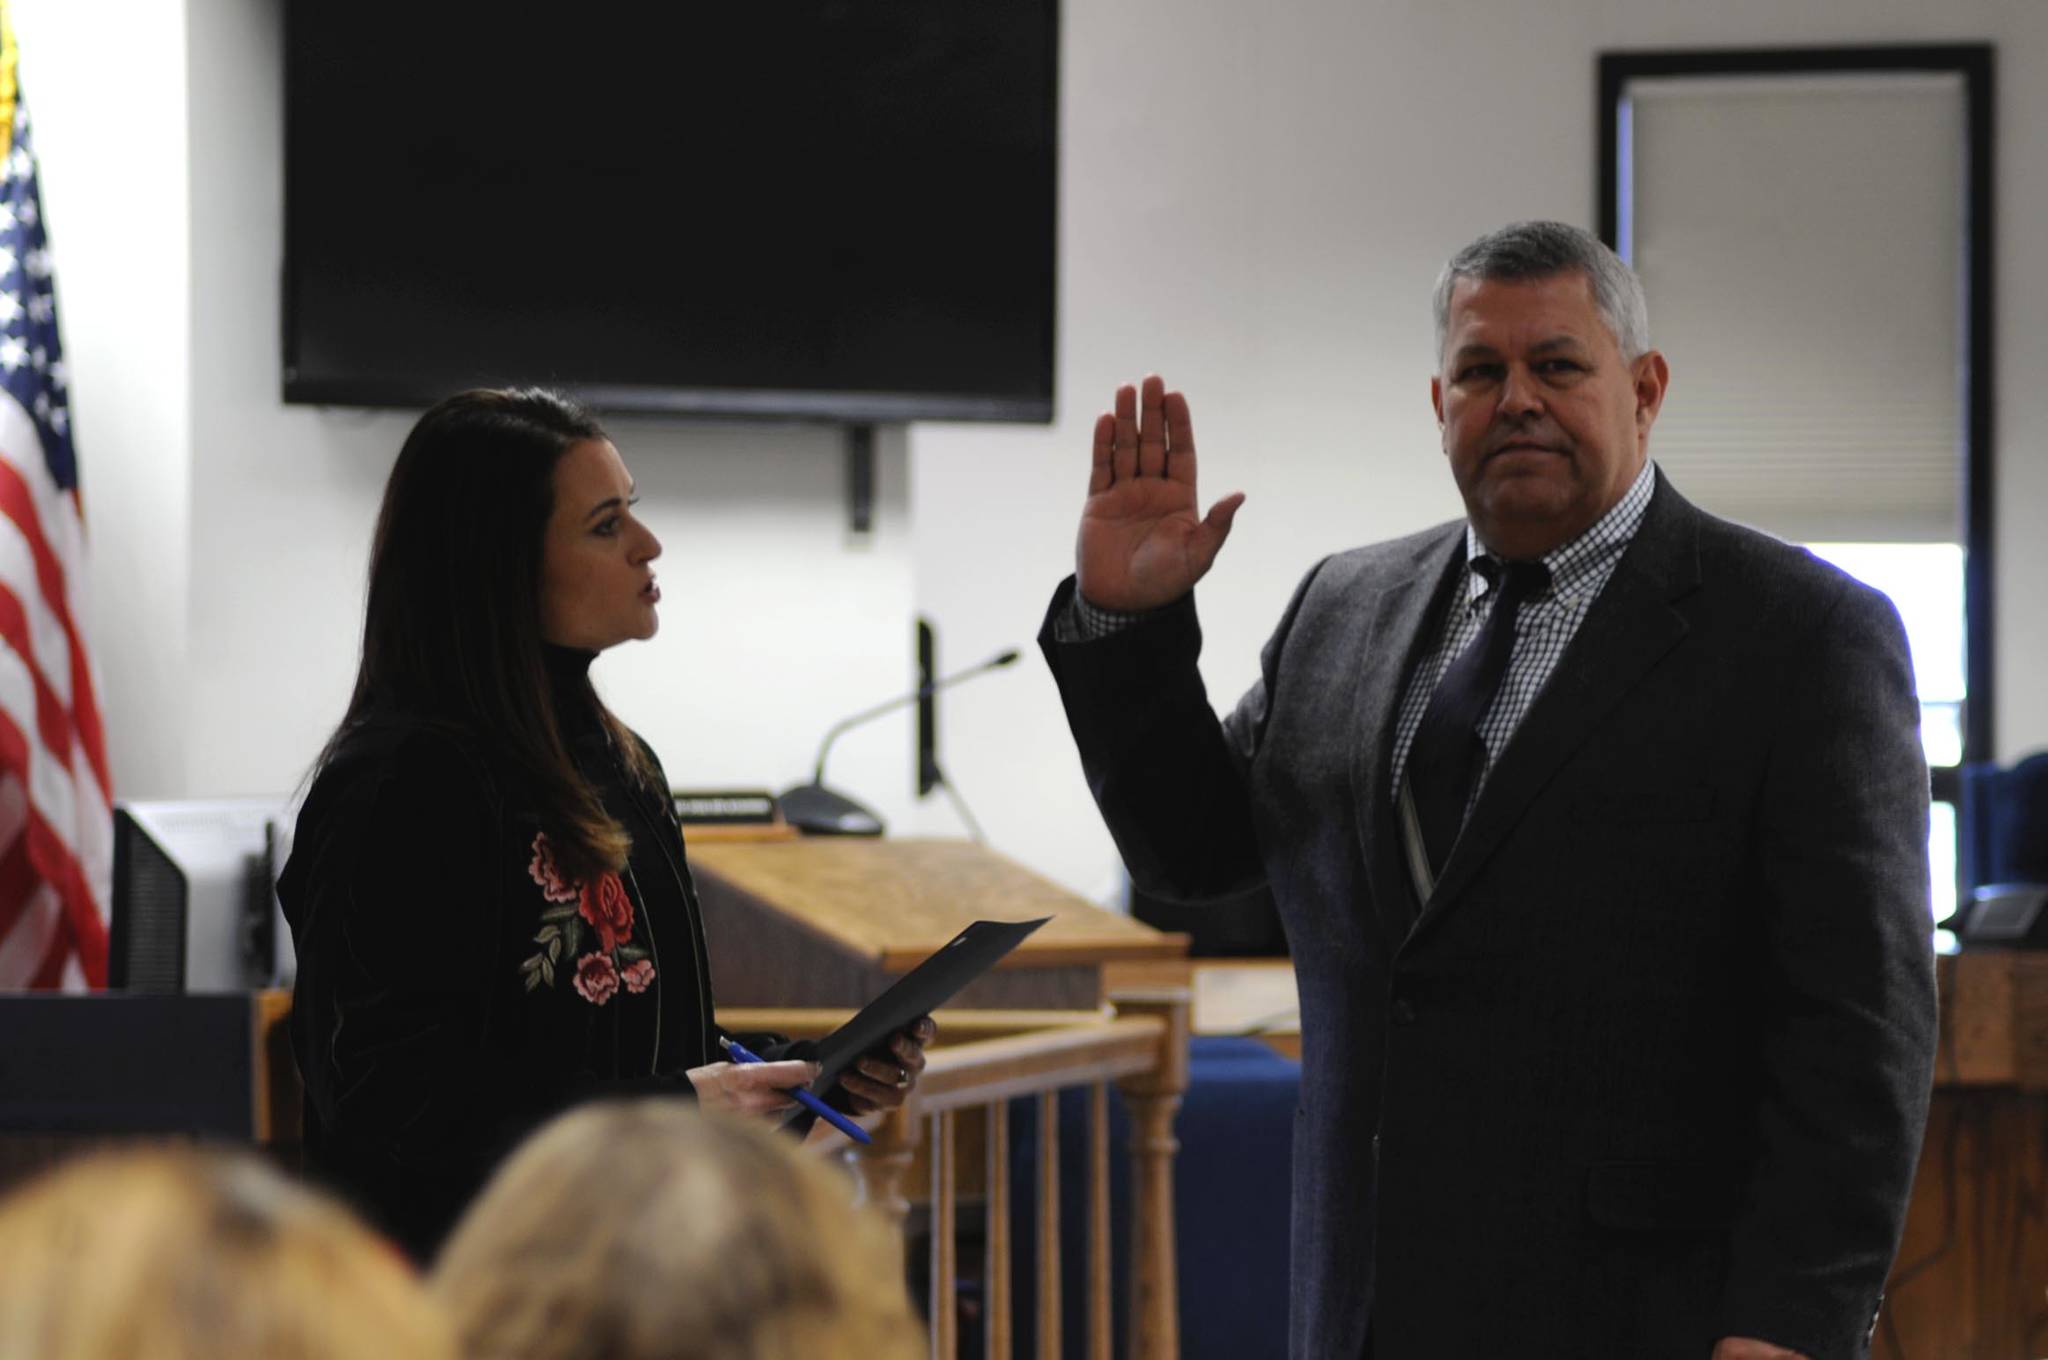 Borough Clerk Johni Blankenship (left) administers the oath of office to Borough Mayor Charlie Pierce during a swearing-in ceremony at the George A. Navarre Borough Administration Building on Monday, Nov. 6, 2017 in Soldotna, Alaska. Pierce won the mayor’s seat in a runoff election held Oct. 24, narrowly defeating opponent Linda Hutchings with a margin of 45 votes. (Photo by Elizabeth Earl/Peninsula Clarion)